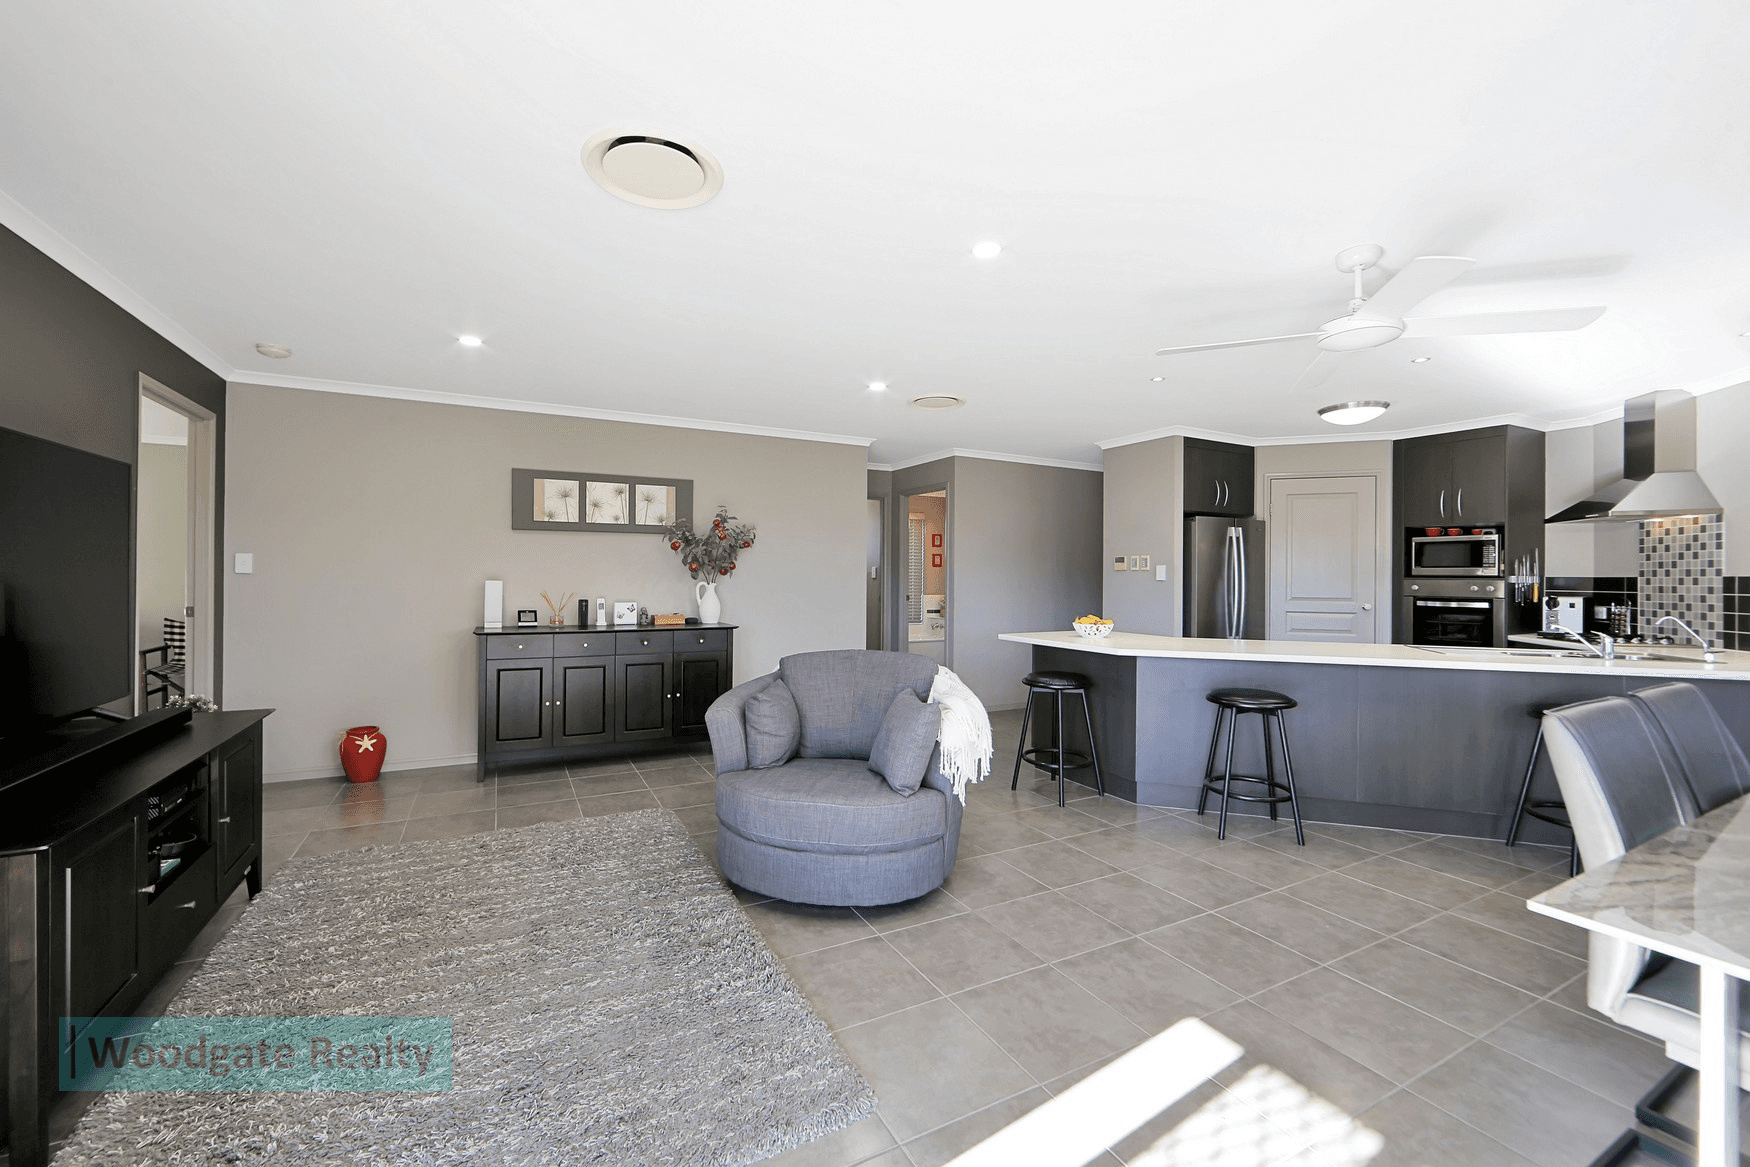 35 Frizzells Rd, Woodgate, QLD 4660